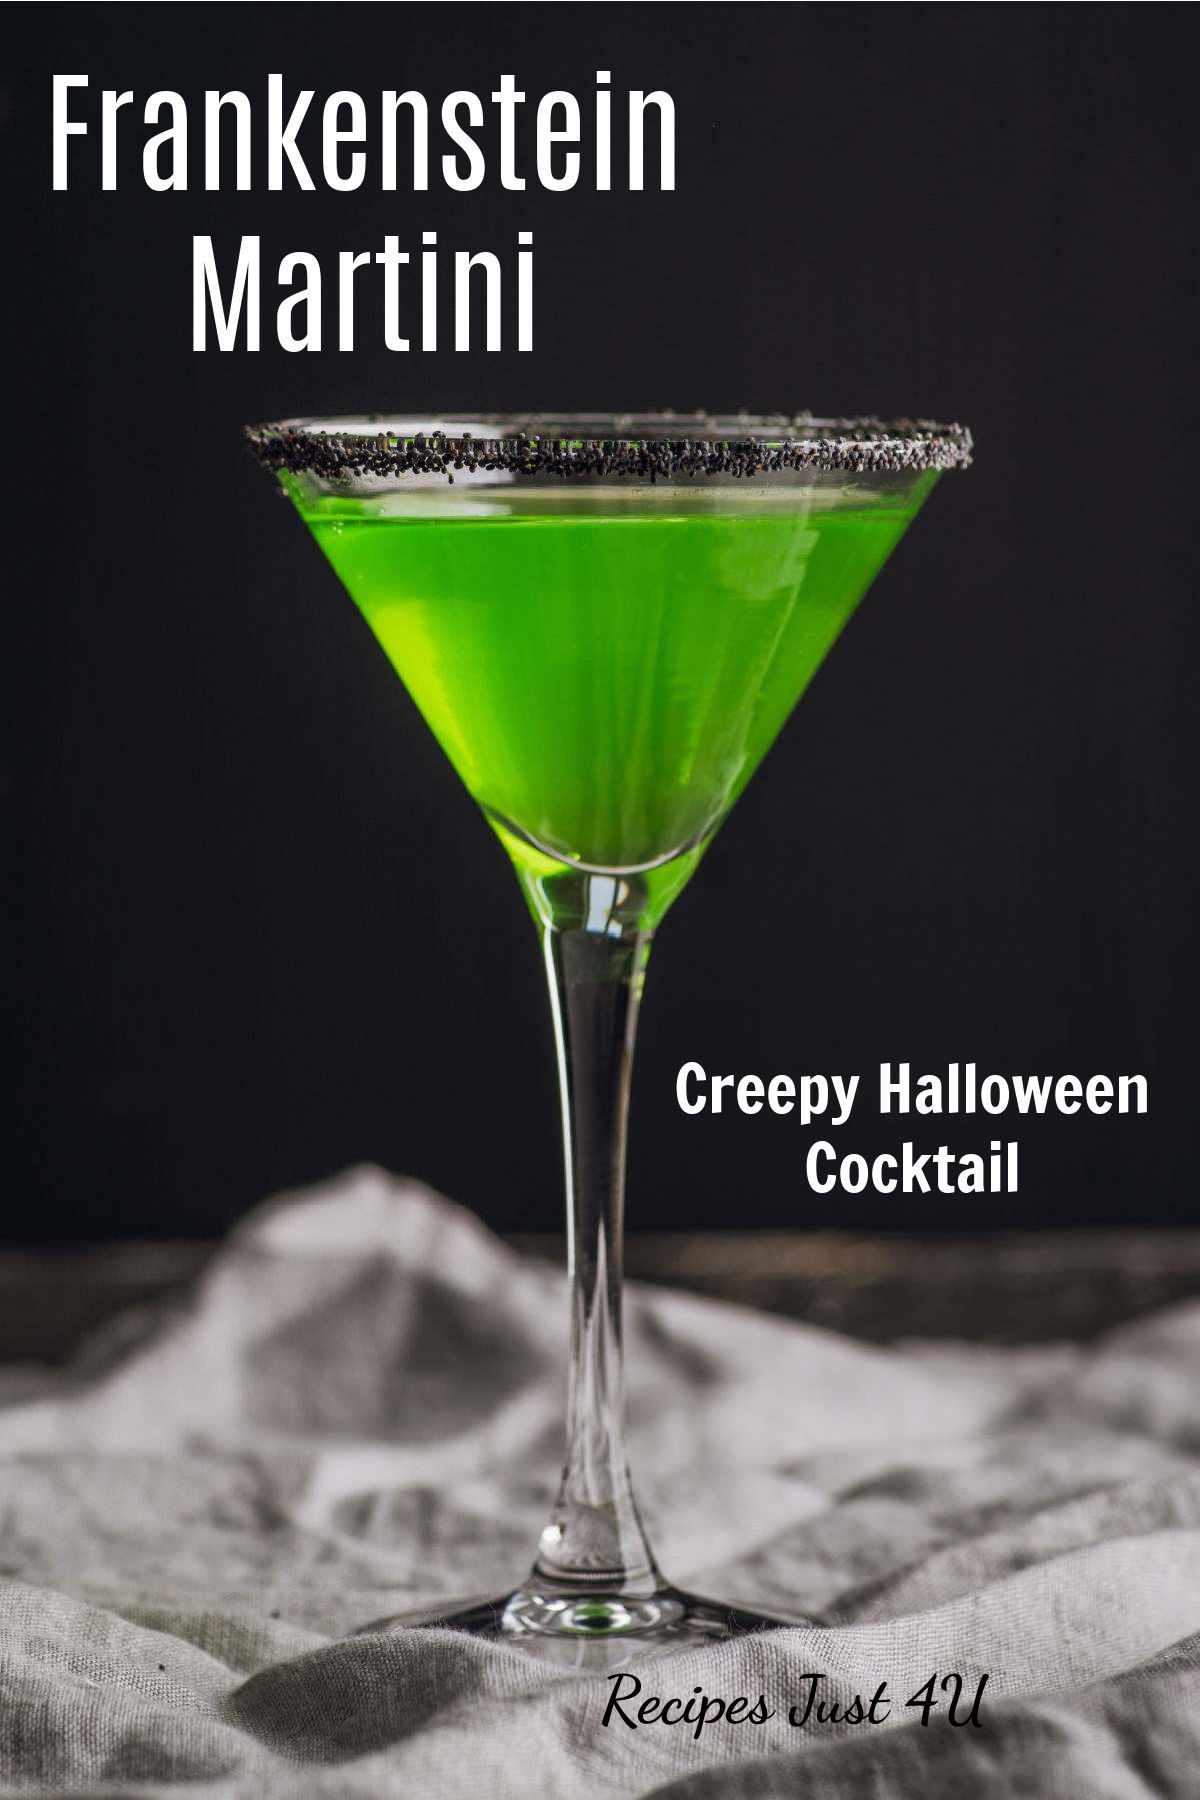 Green drink in a martini glass with words Frankenstein martini - creepy Halloween cocktail recipe.